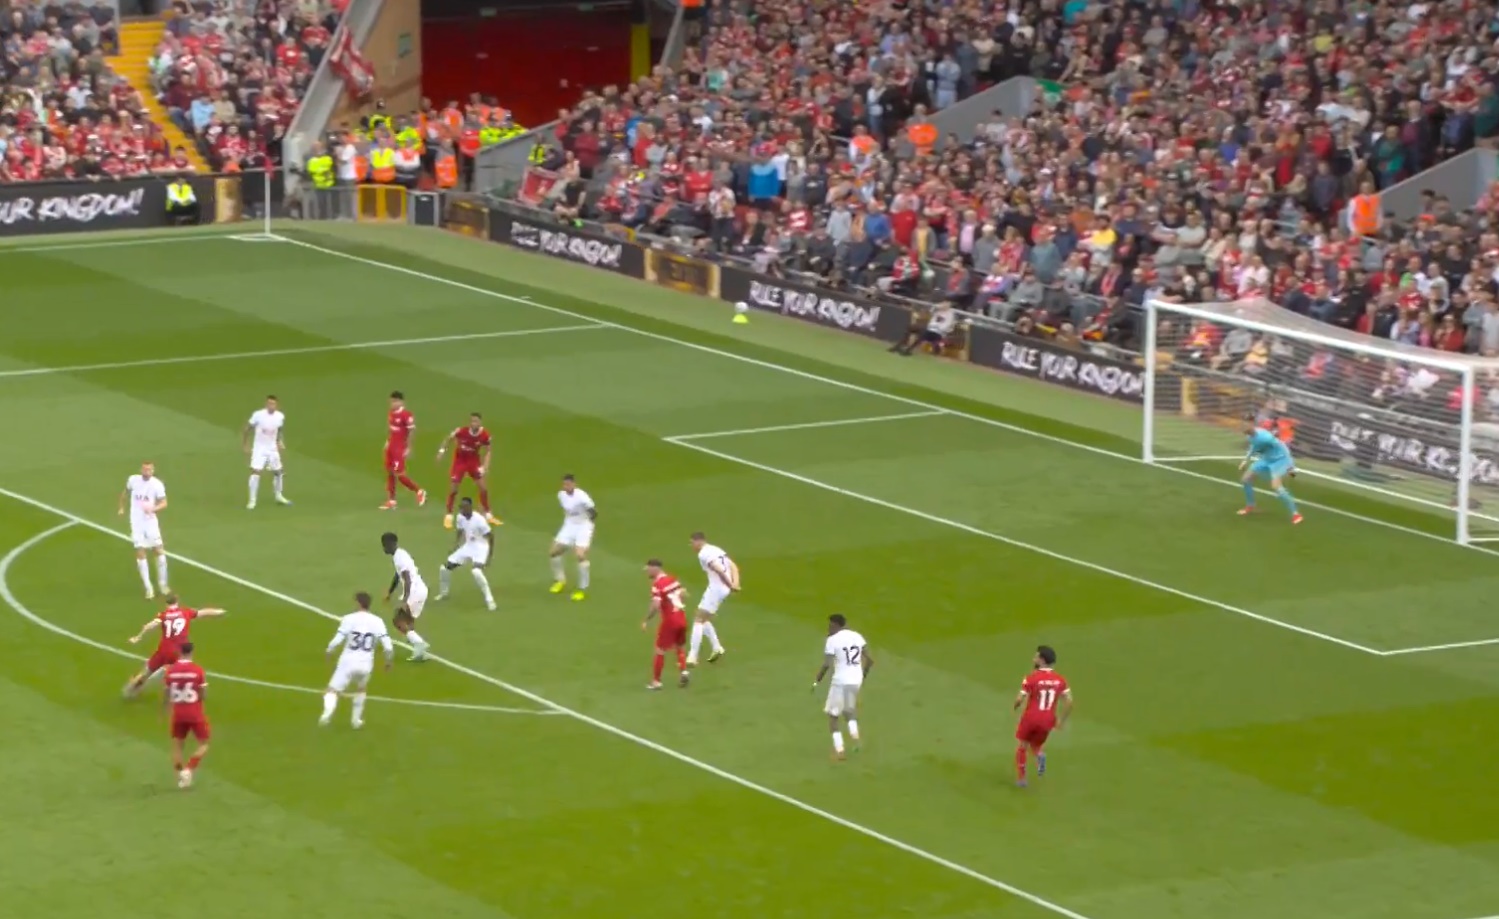 (Video) Harvey Elliott unleashes Louvre-worthy finish as Liverpool run riot at raucous Anfield